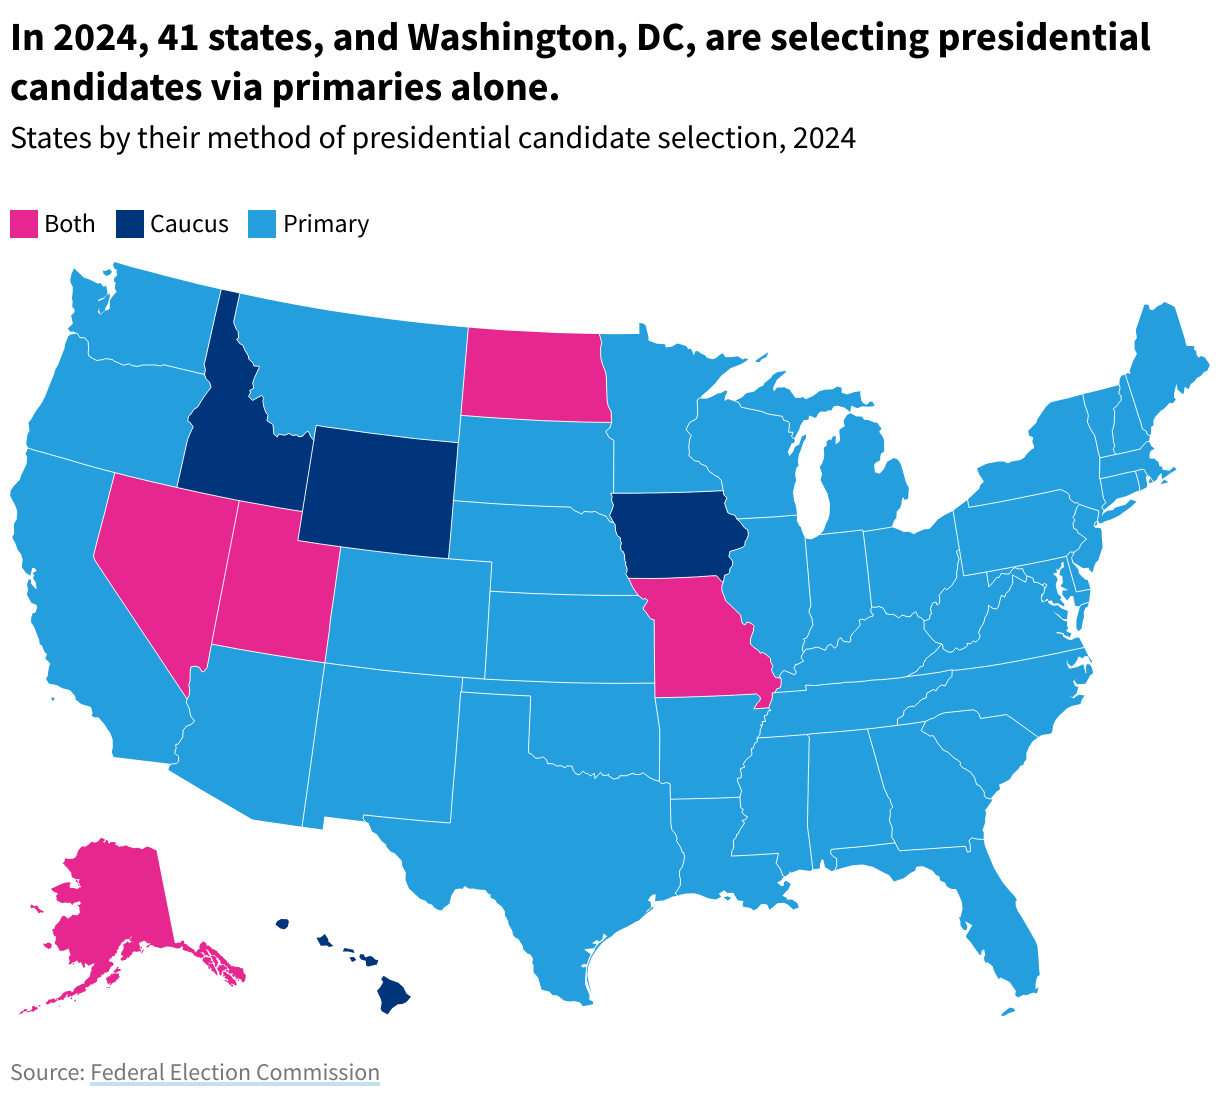 Categorical map of United States showing which states select presidential candidates by primaries, caucuses, or both.